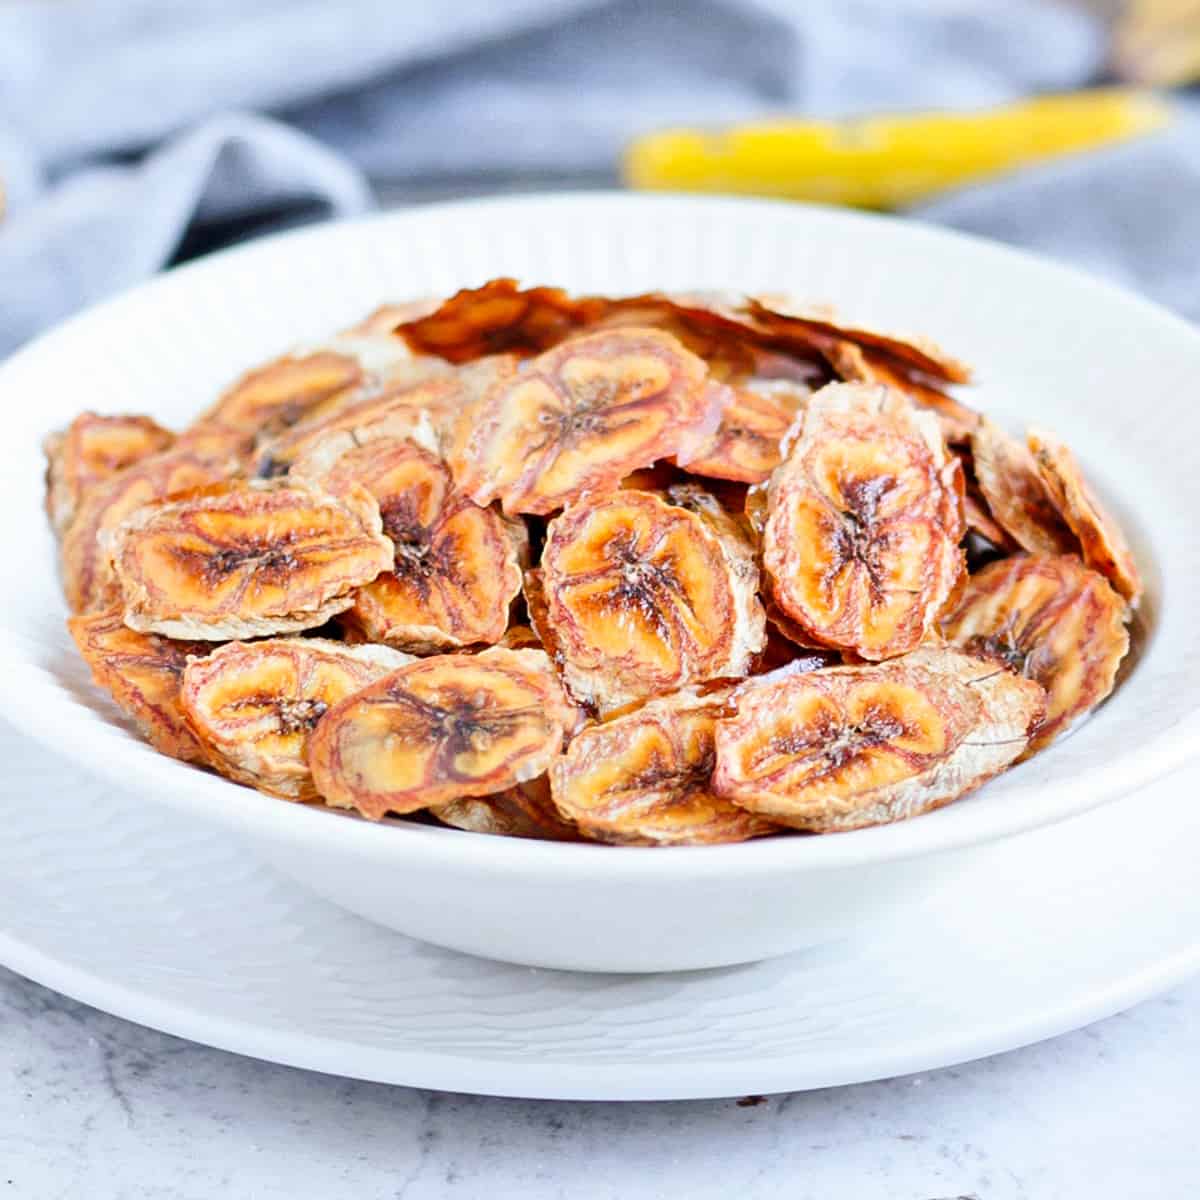 How to make Banana Chips in the Oven